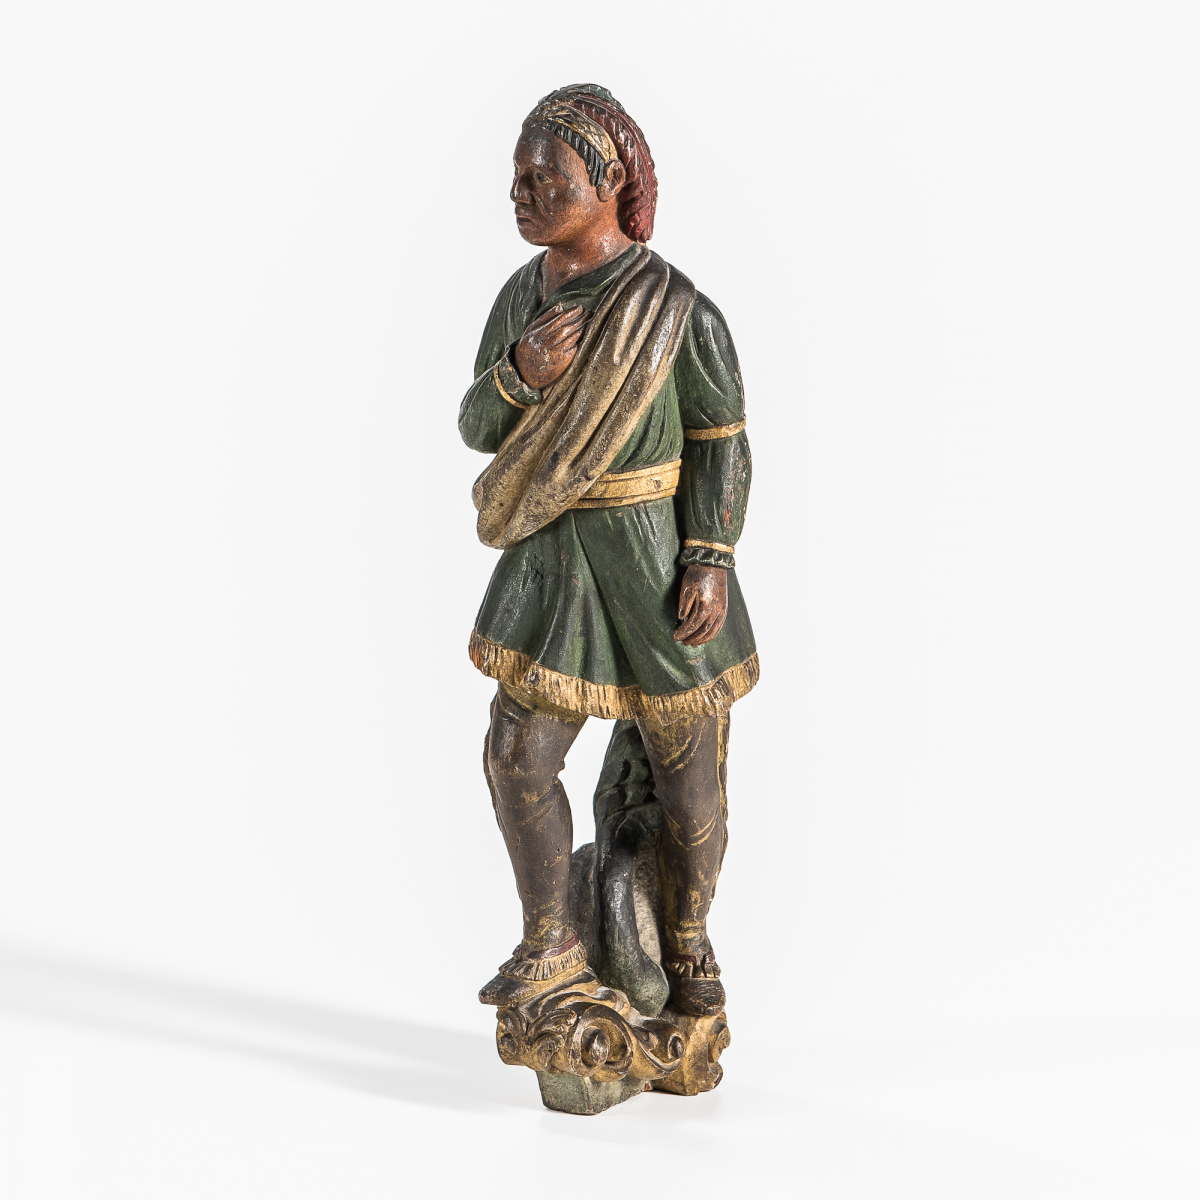 Carved and Painted Model for an Indian Chief Figurehead, America, 19th century